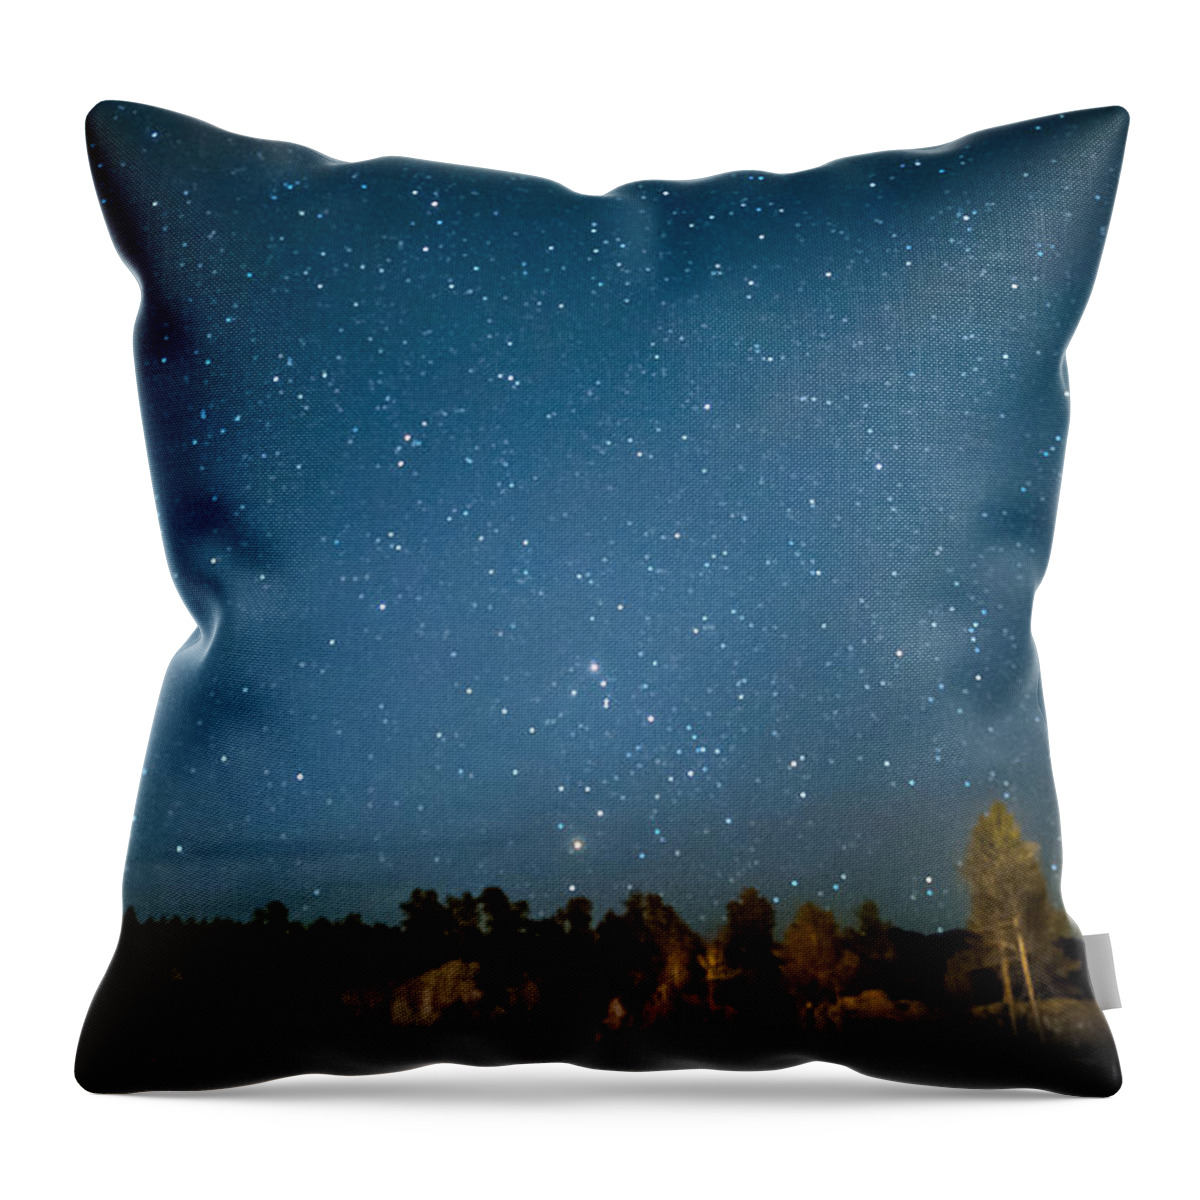 Black Hills Throw Pillow featuring the photograph Black Hills Night by Greni Graph